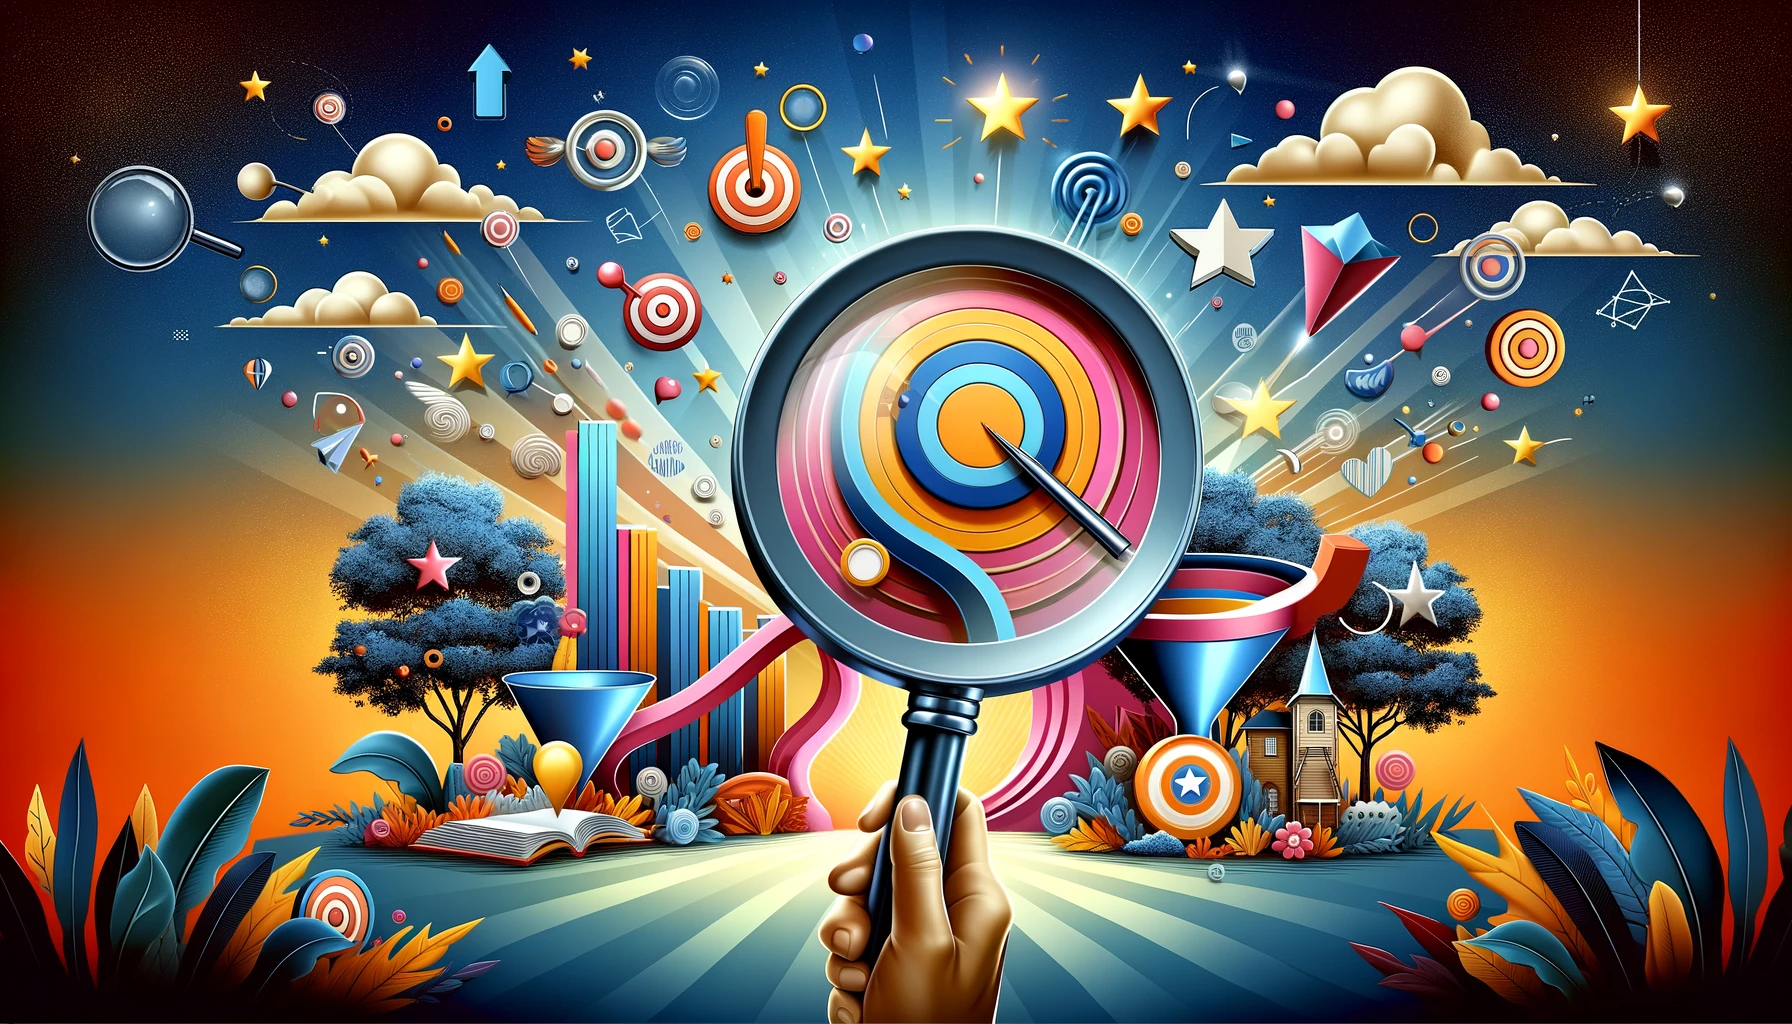 Abstract visuals symbolizing the optimization of Landing Page Conversion, featuring a magnifying glass on target, conversion funnel, and user engagement symbols.